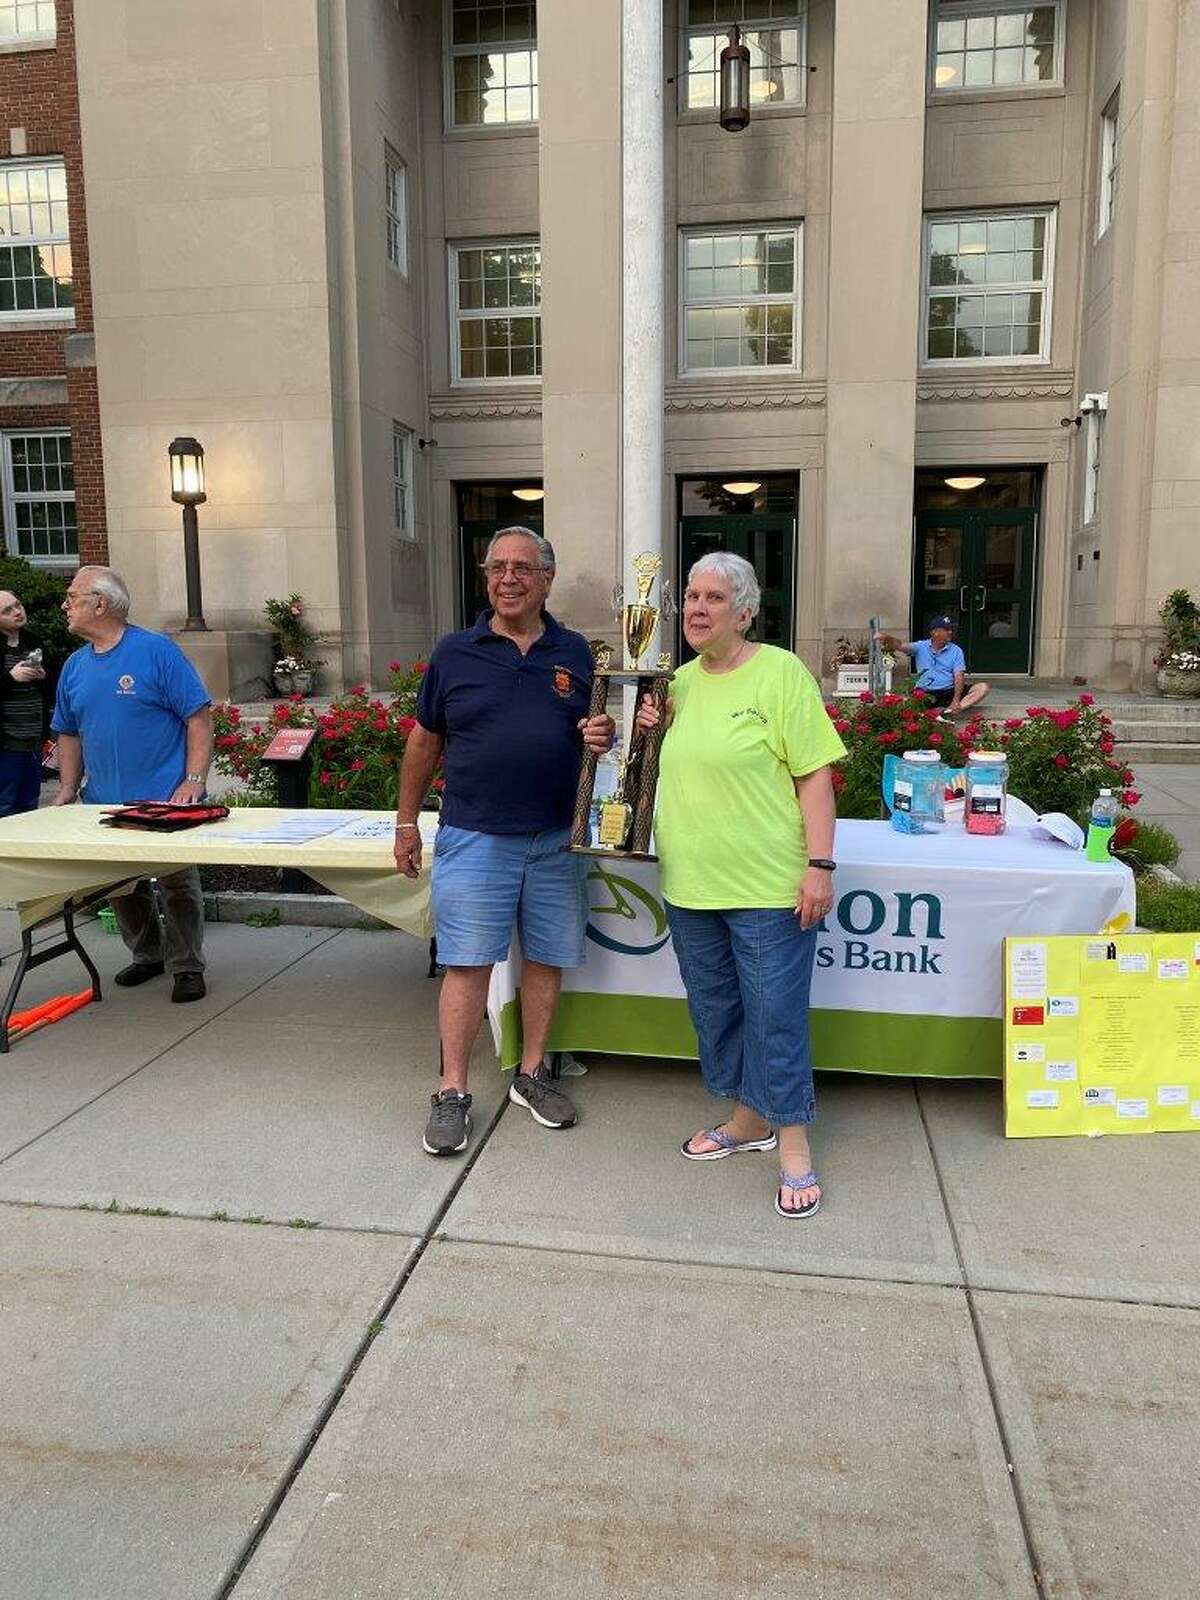 The annual Torrington Lions Club Car Show was held June 3 on Main Street, Torrington. Club member Mitchell Luiza presented the President’s Choice trophy to ViVianne Evon, who was there on her father’s behalf. Gary’s Hilltop sponsored this award.